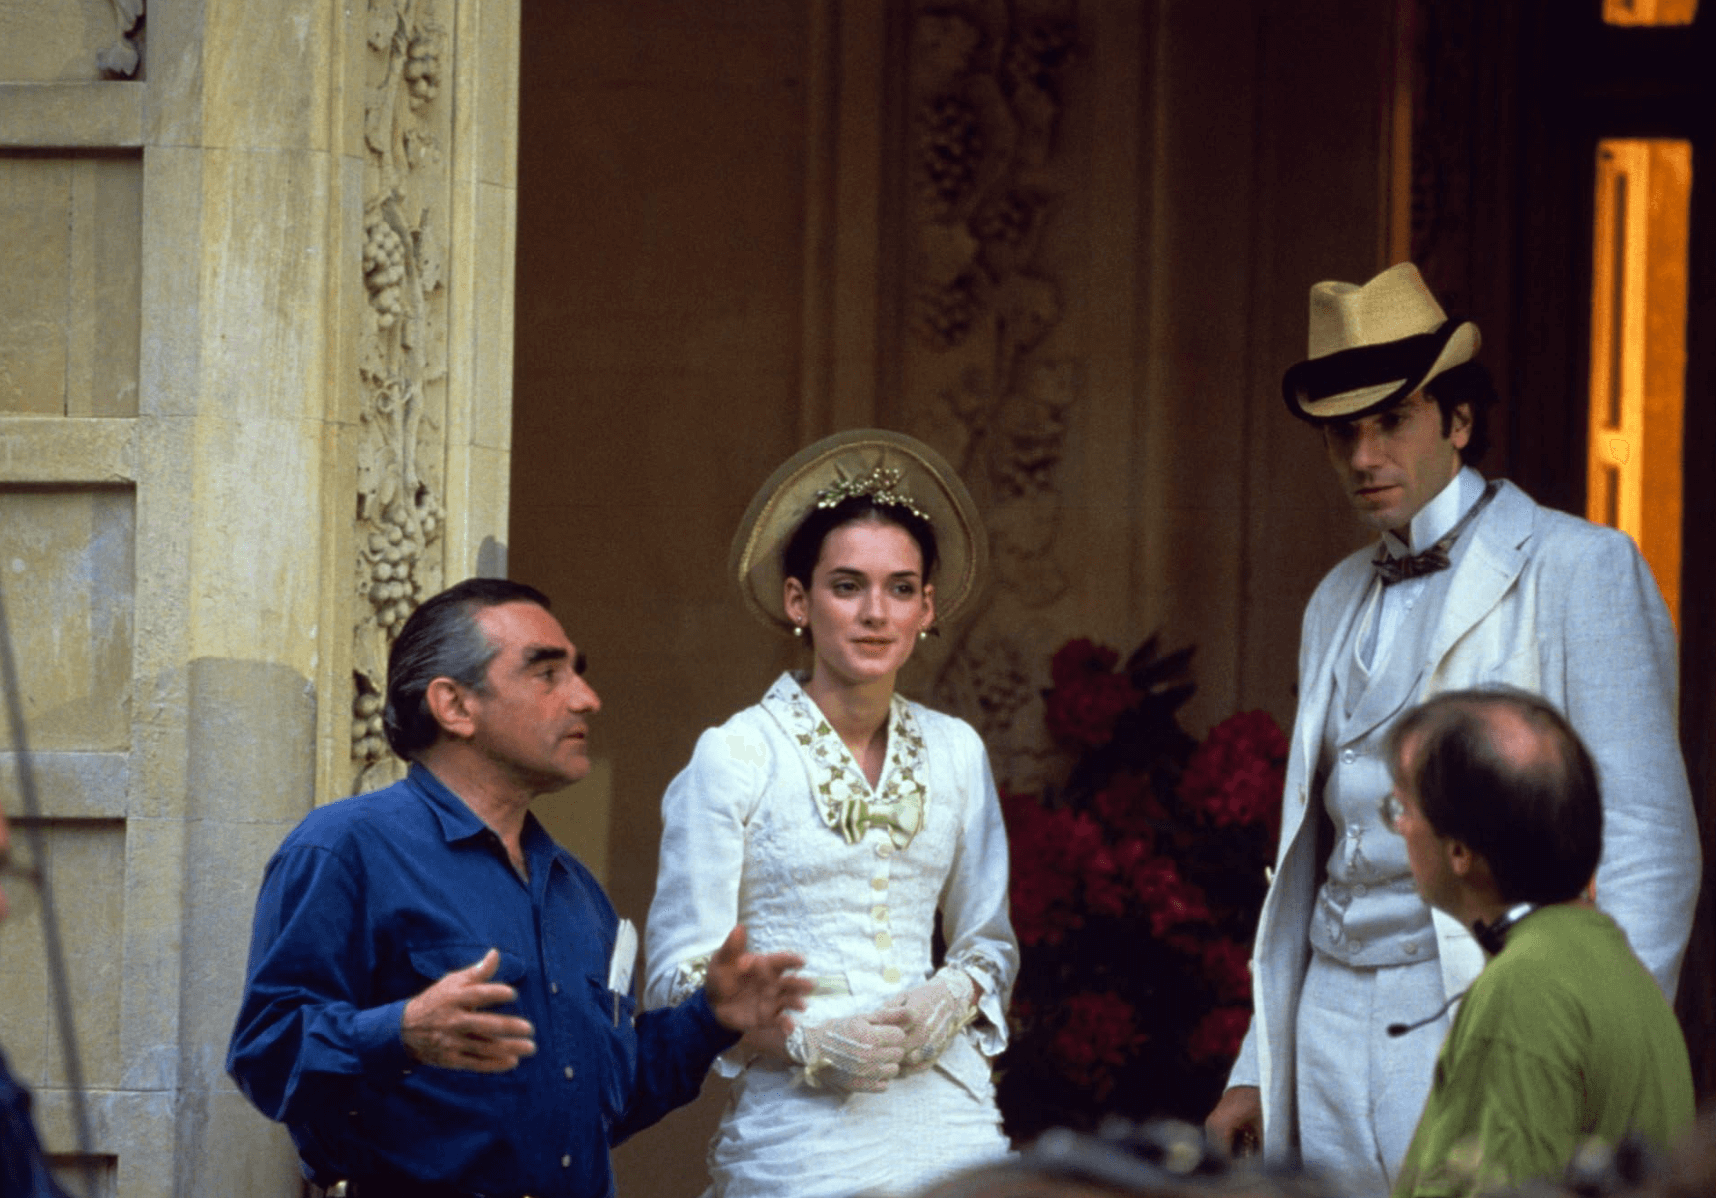 Scorsese also directed the 1993 period drama, “The Age of Innocence,” which explored the conflict between desire and decorum within New York society in the 1800s